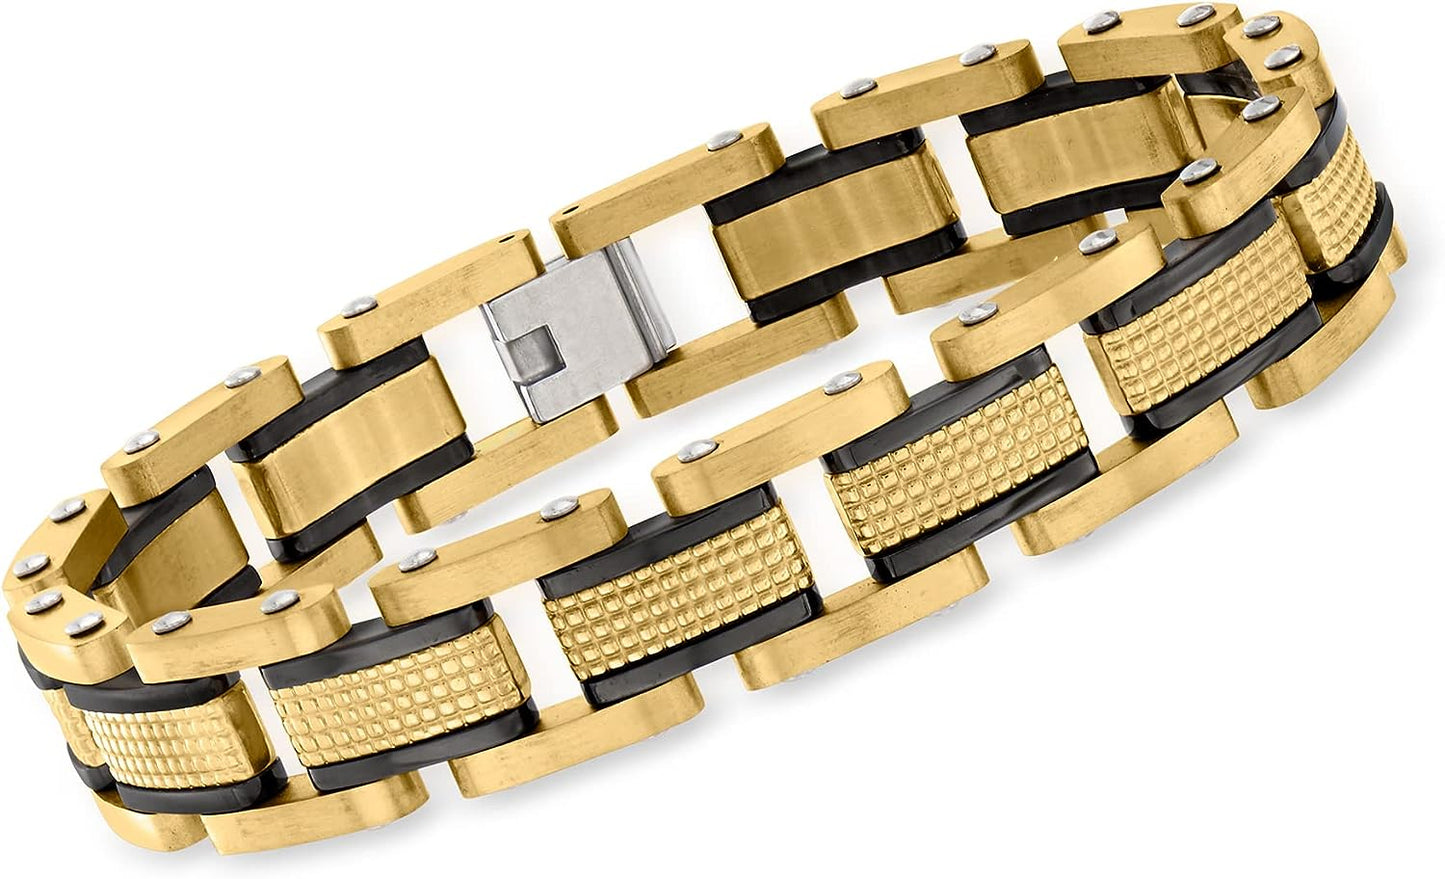 Men's 18kt Gold-Plated Stainless Steel Link Bracelet. 8.5 inches